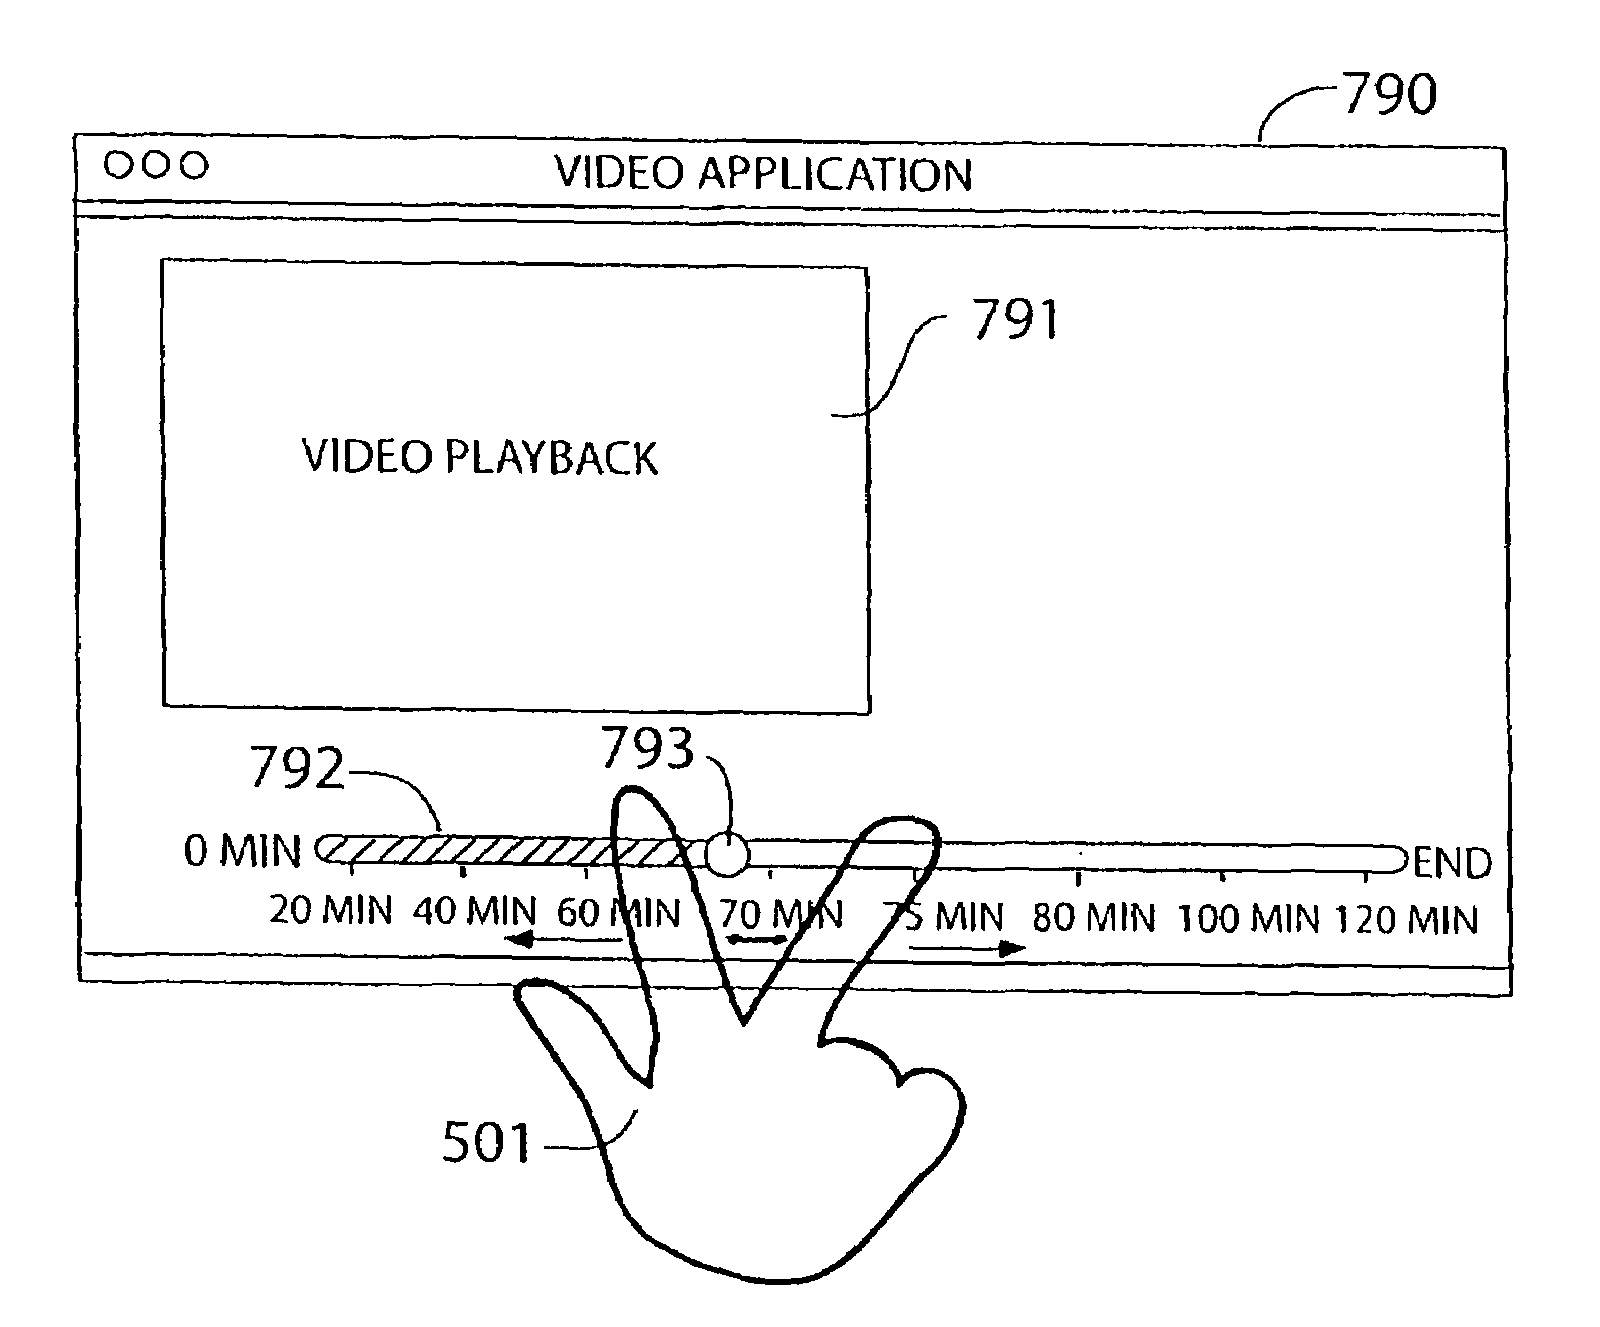 Gestures for controlling, manipulating, and editing of media files using touch sensitive devices